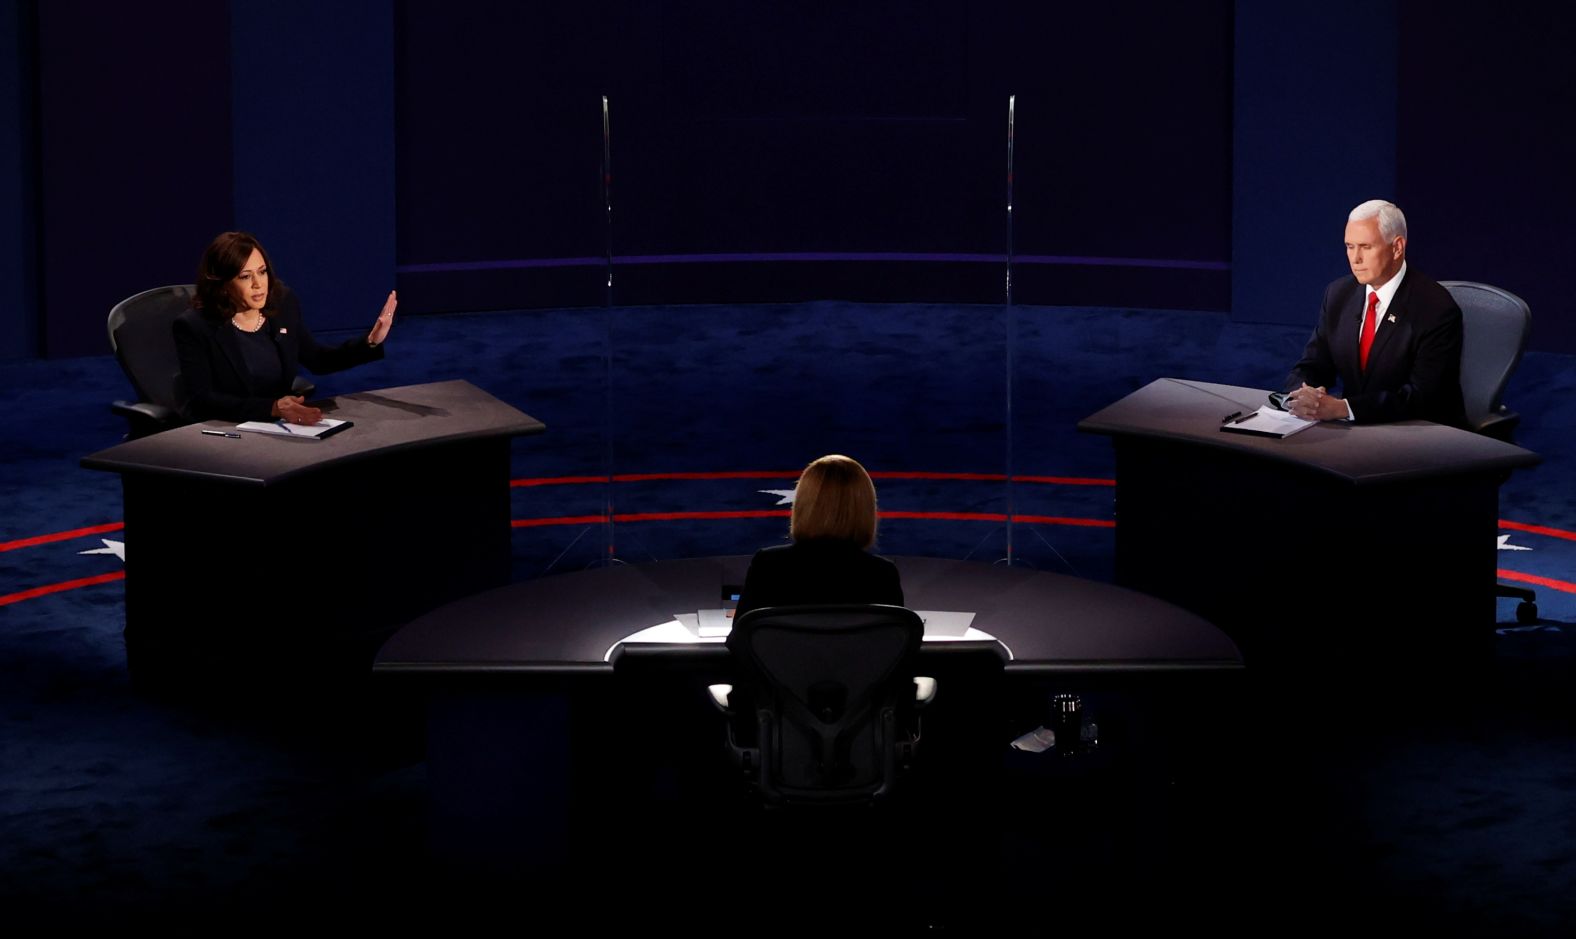 This was the second of four scheduled debates during the campaign season. There are supposed to be two more presidential debates before the election.